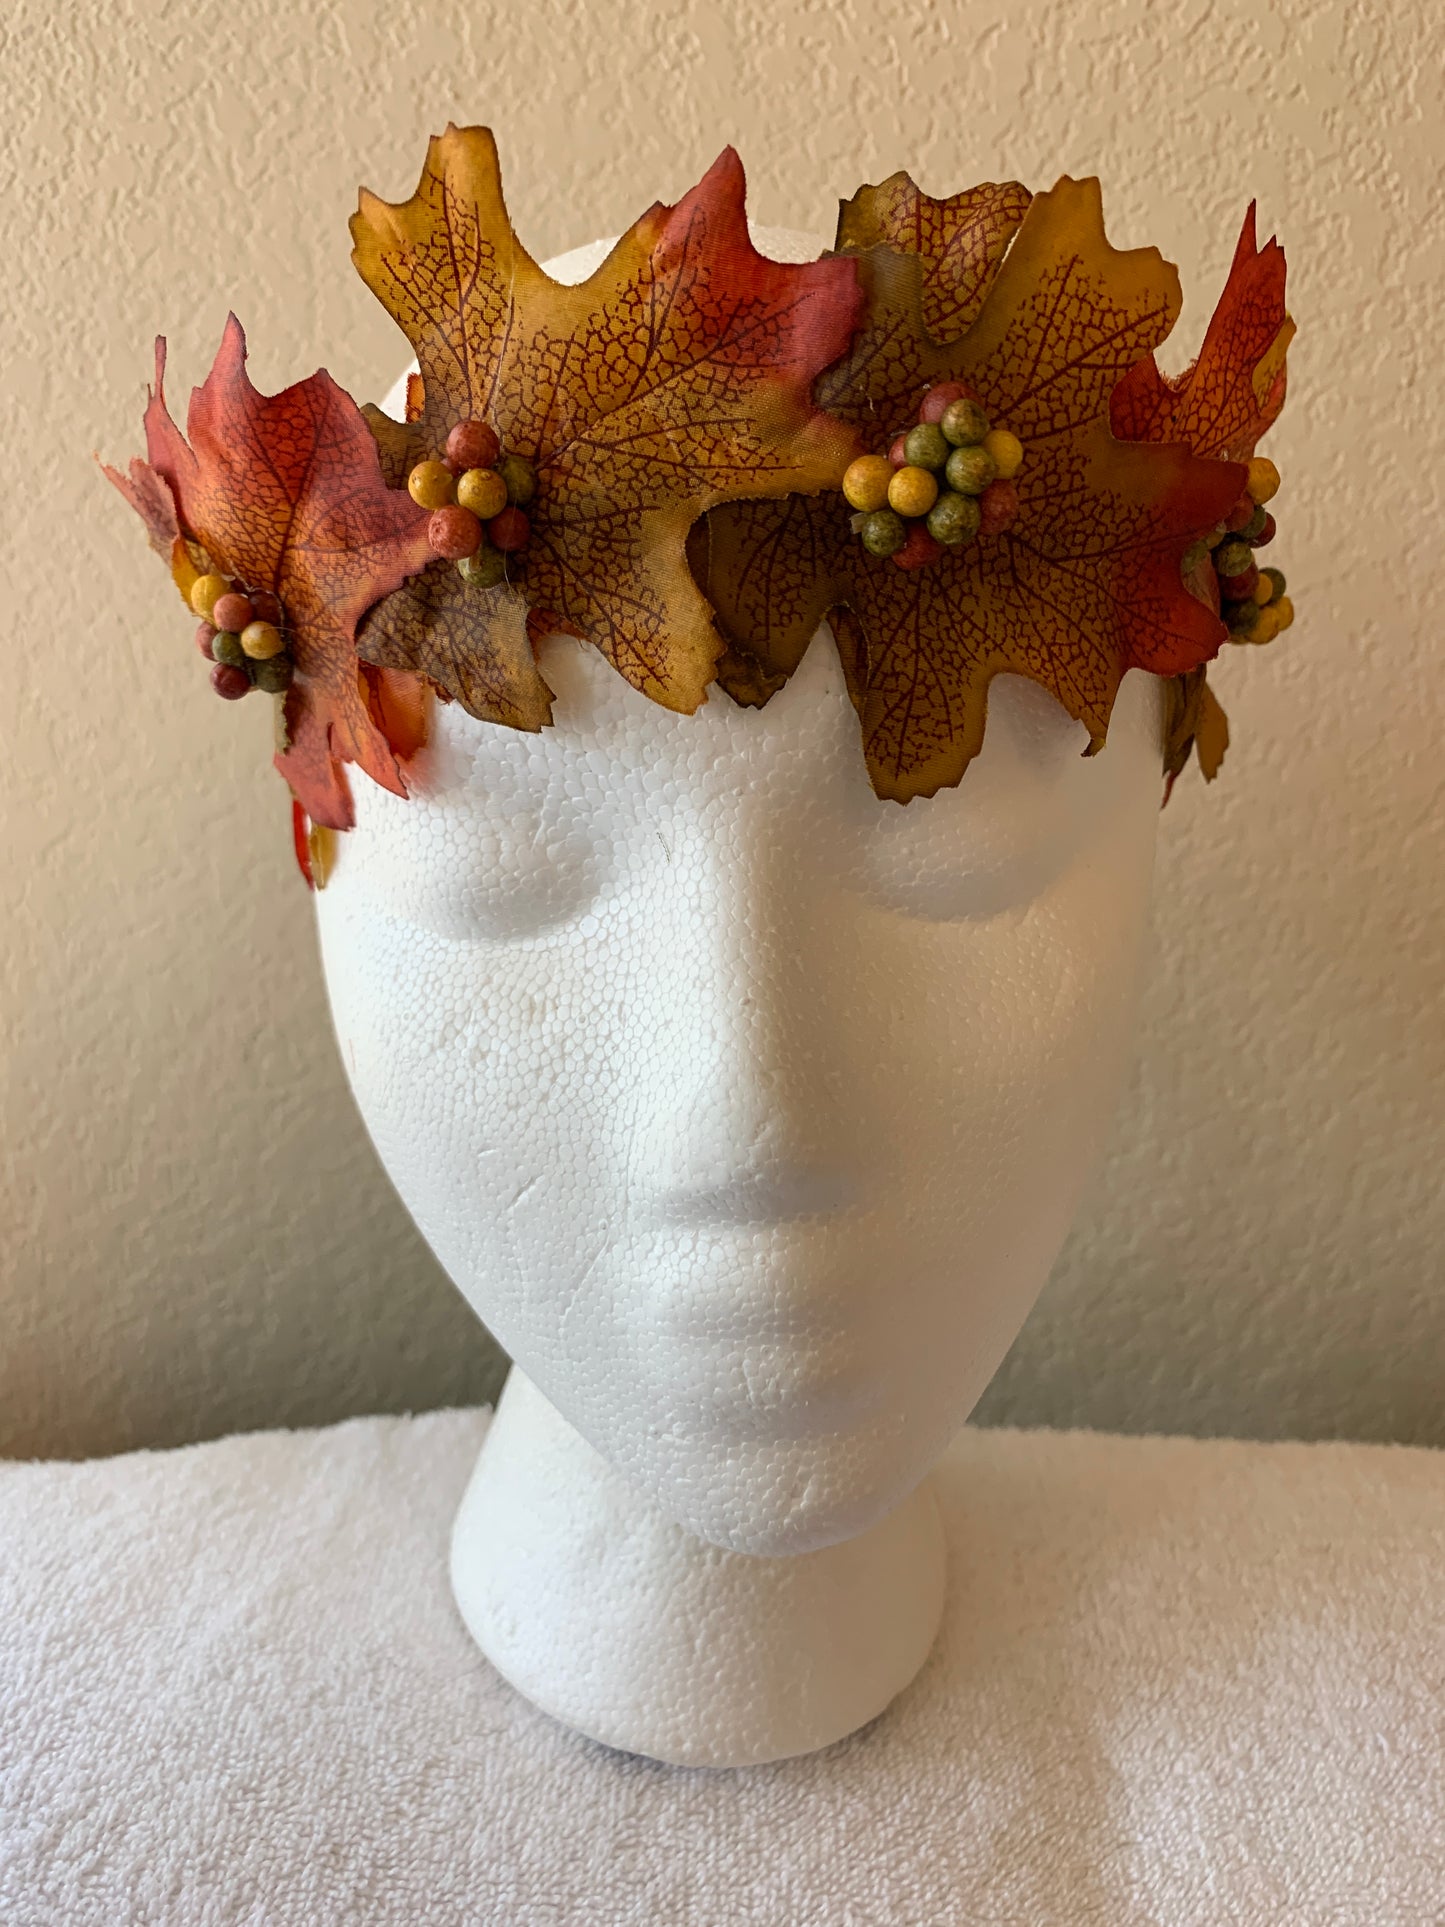 All-Leaf Wreath - Oak Leaves Fall Colors - With Berries